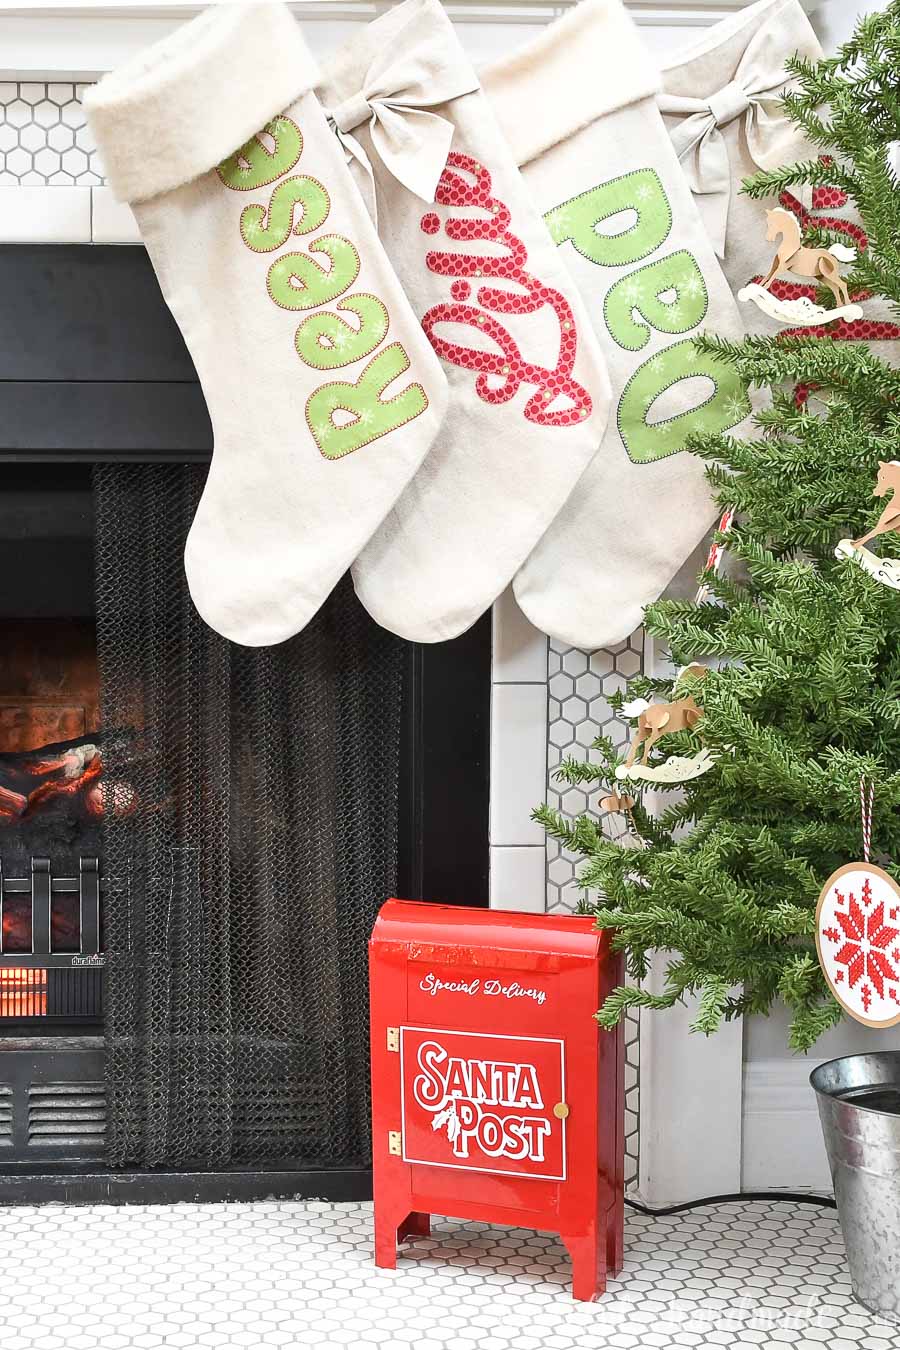 Fireplace hearth decorated with small tree, personalized stockings and red DIY Santa mailbox. 